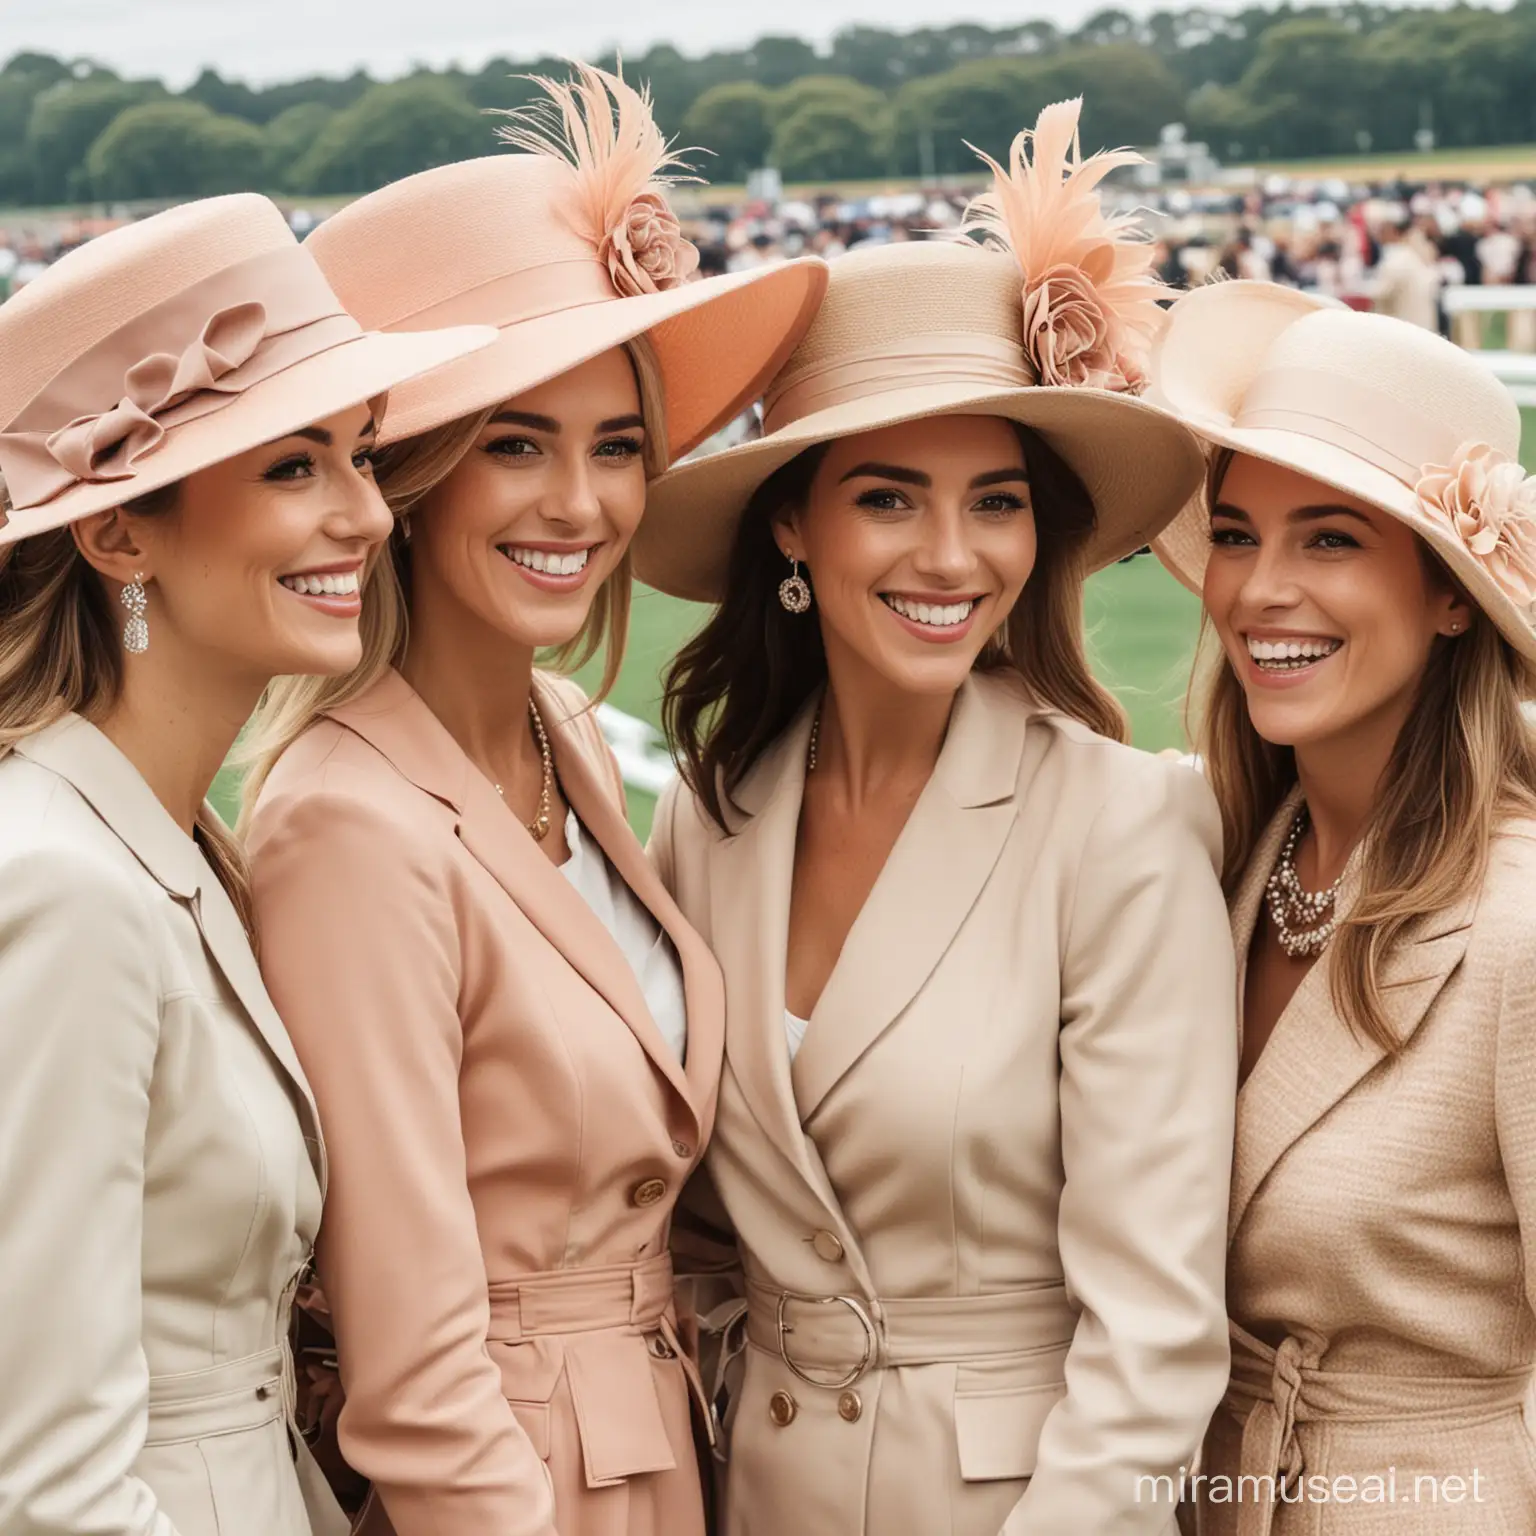 A side view shot of four smiling women  in posh hats taking up half the picture looking towards a race course, using a limited colour palette.
